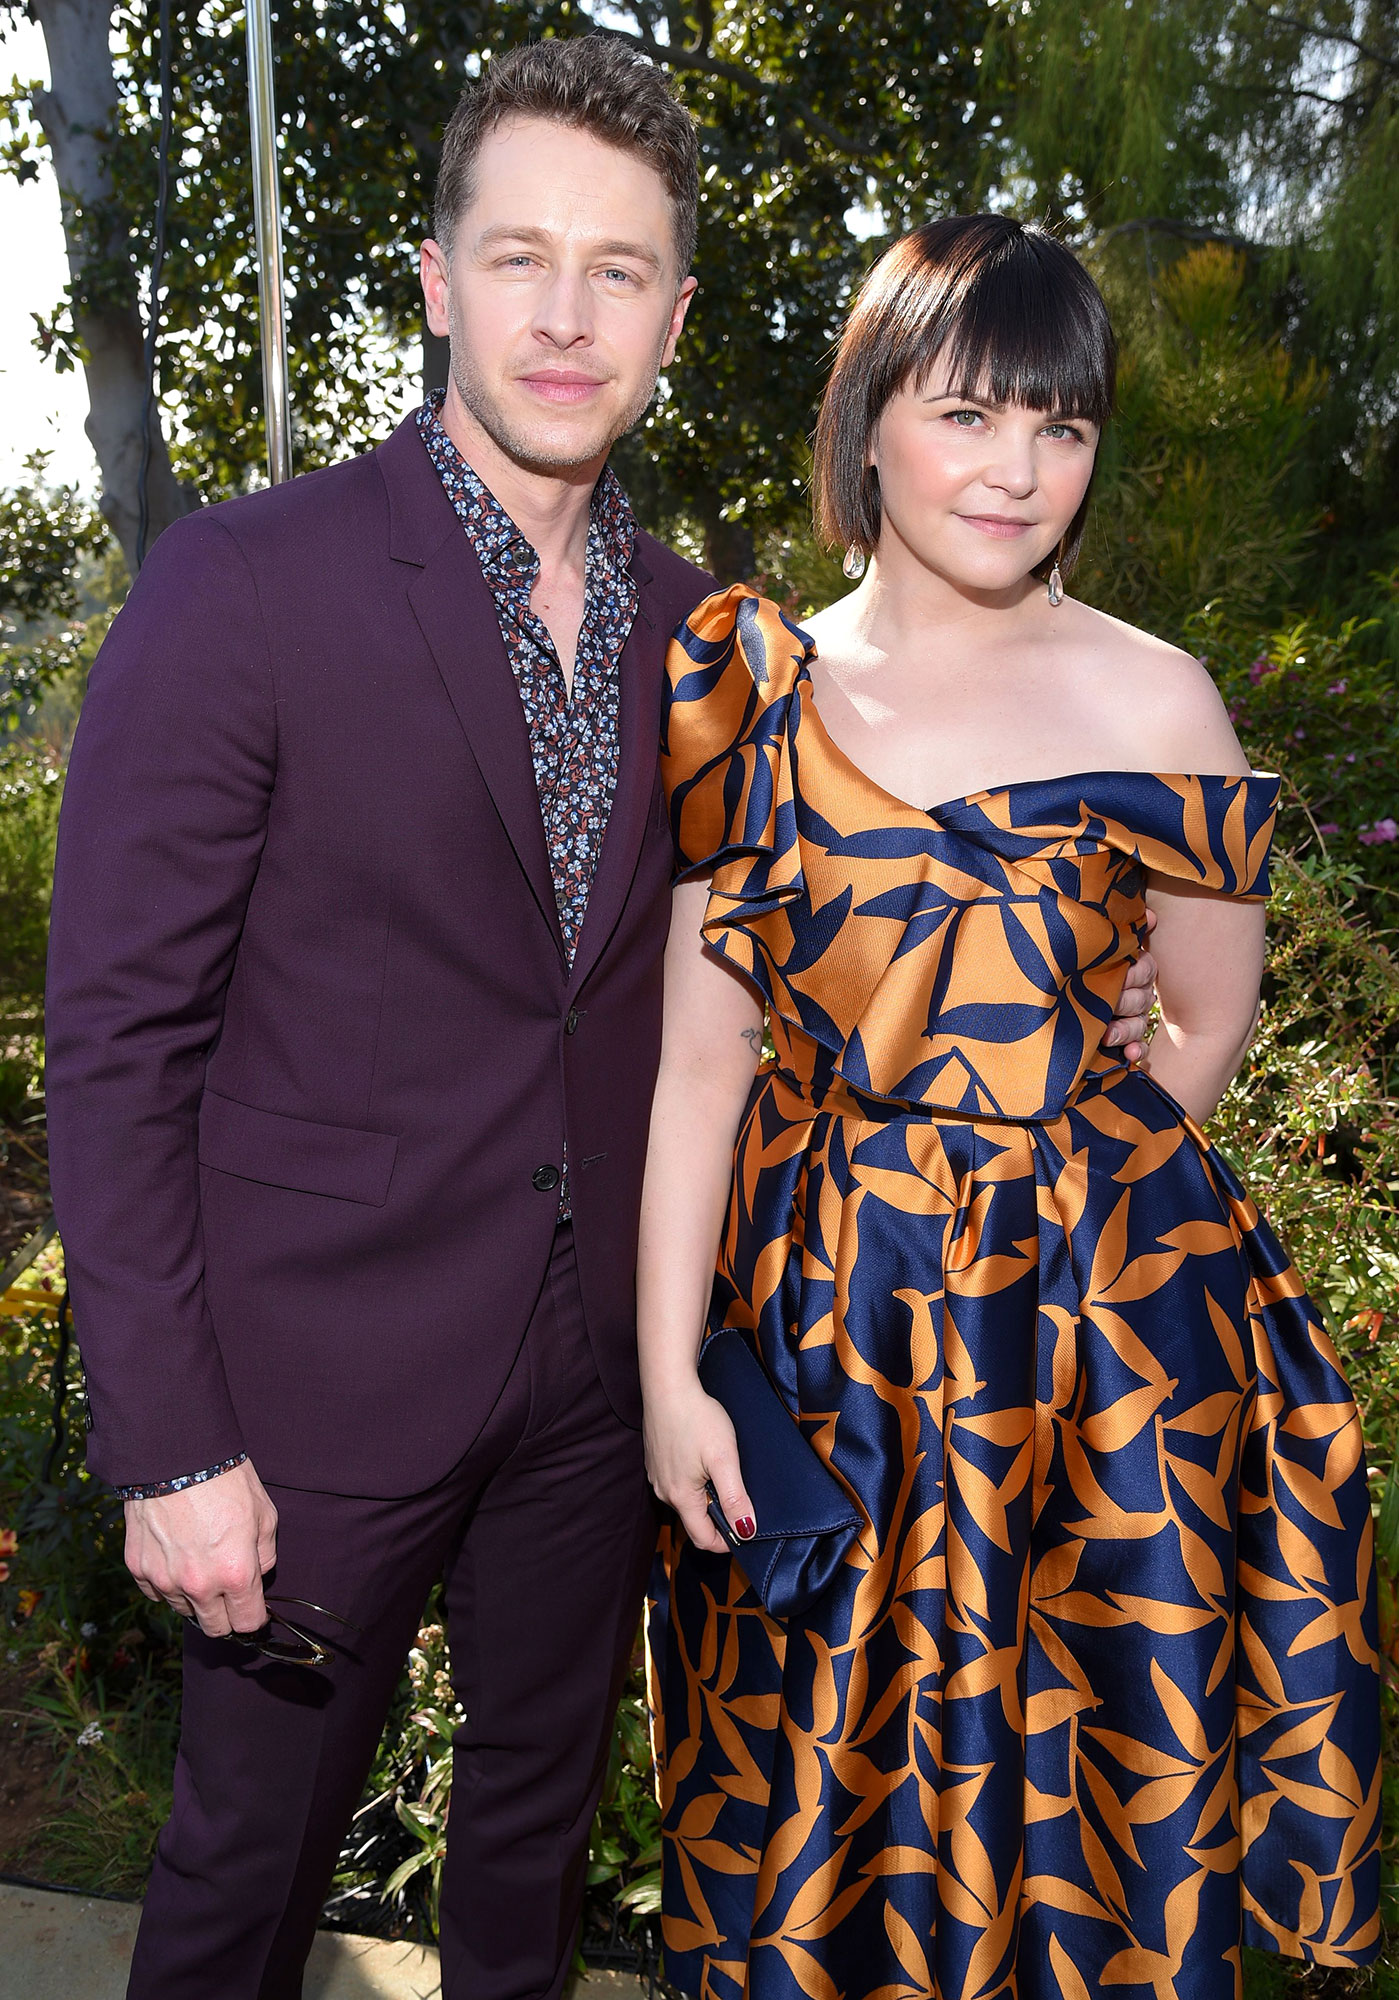 Heres When Josh Dallas Says He Fell in Love With Ginnifer Goodwin